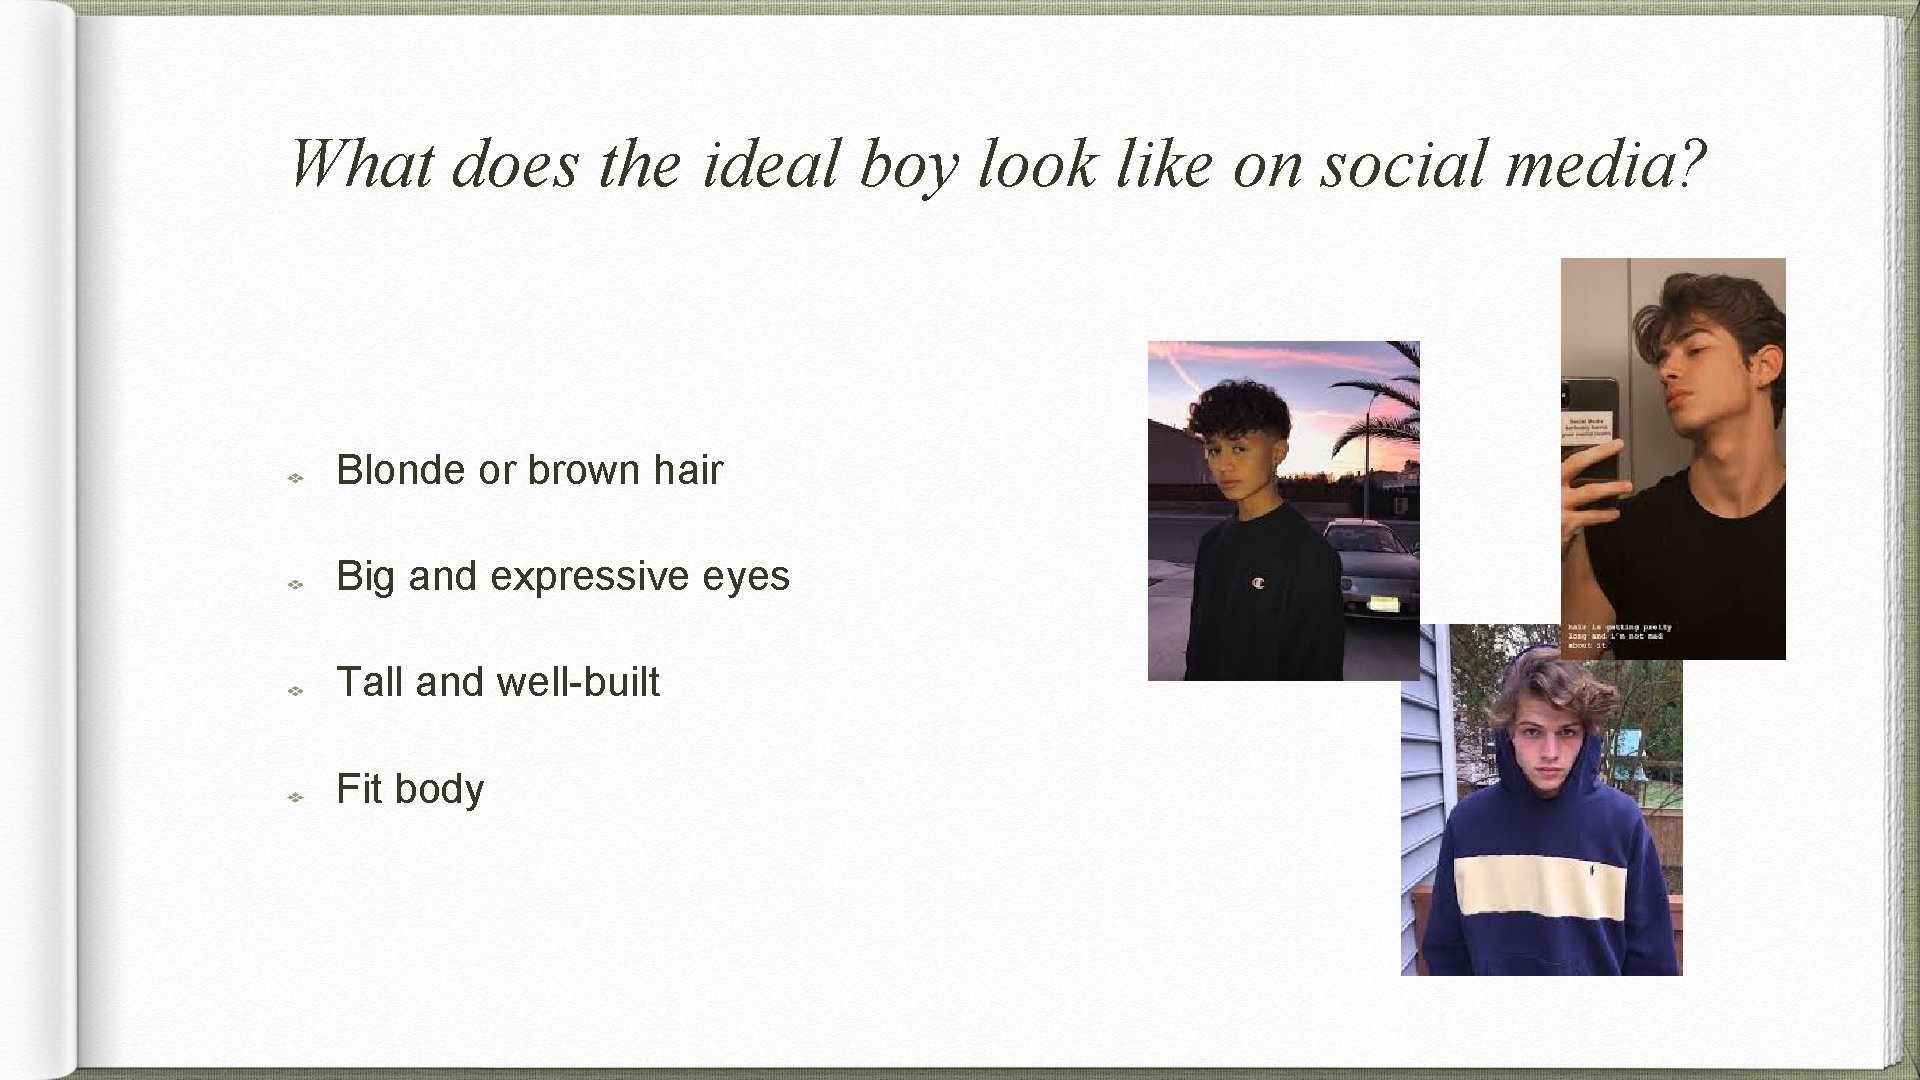 What does the ideal boy look like on social media? Blonde or brown hair